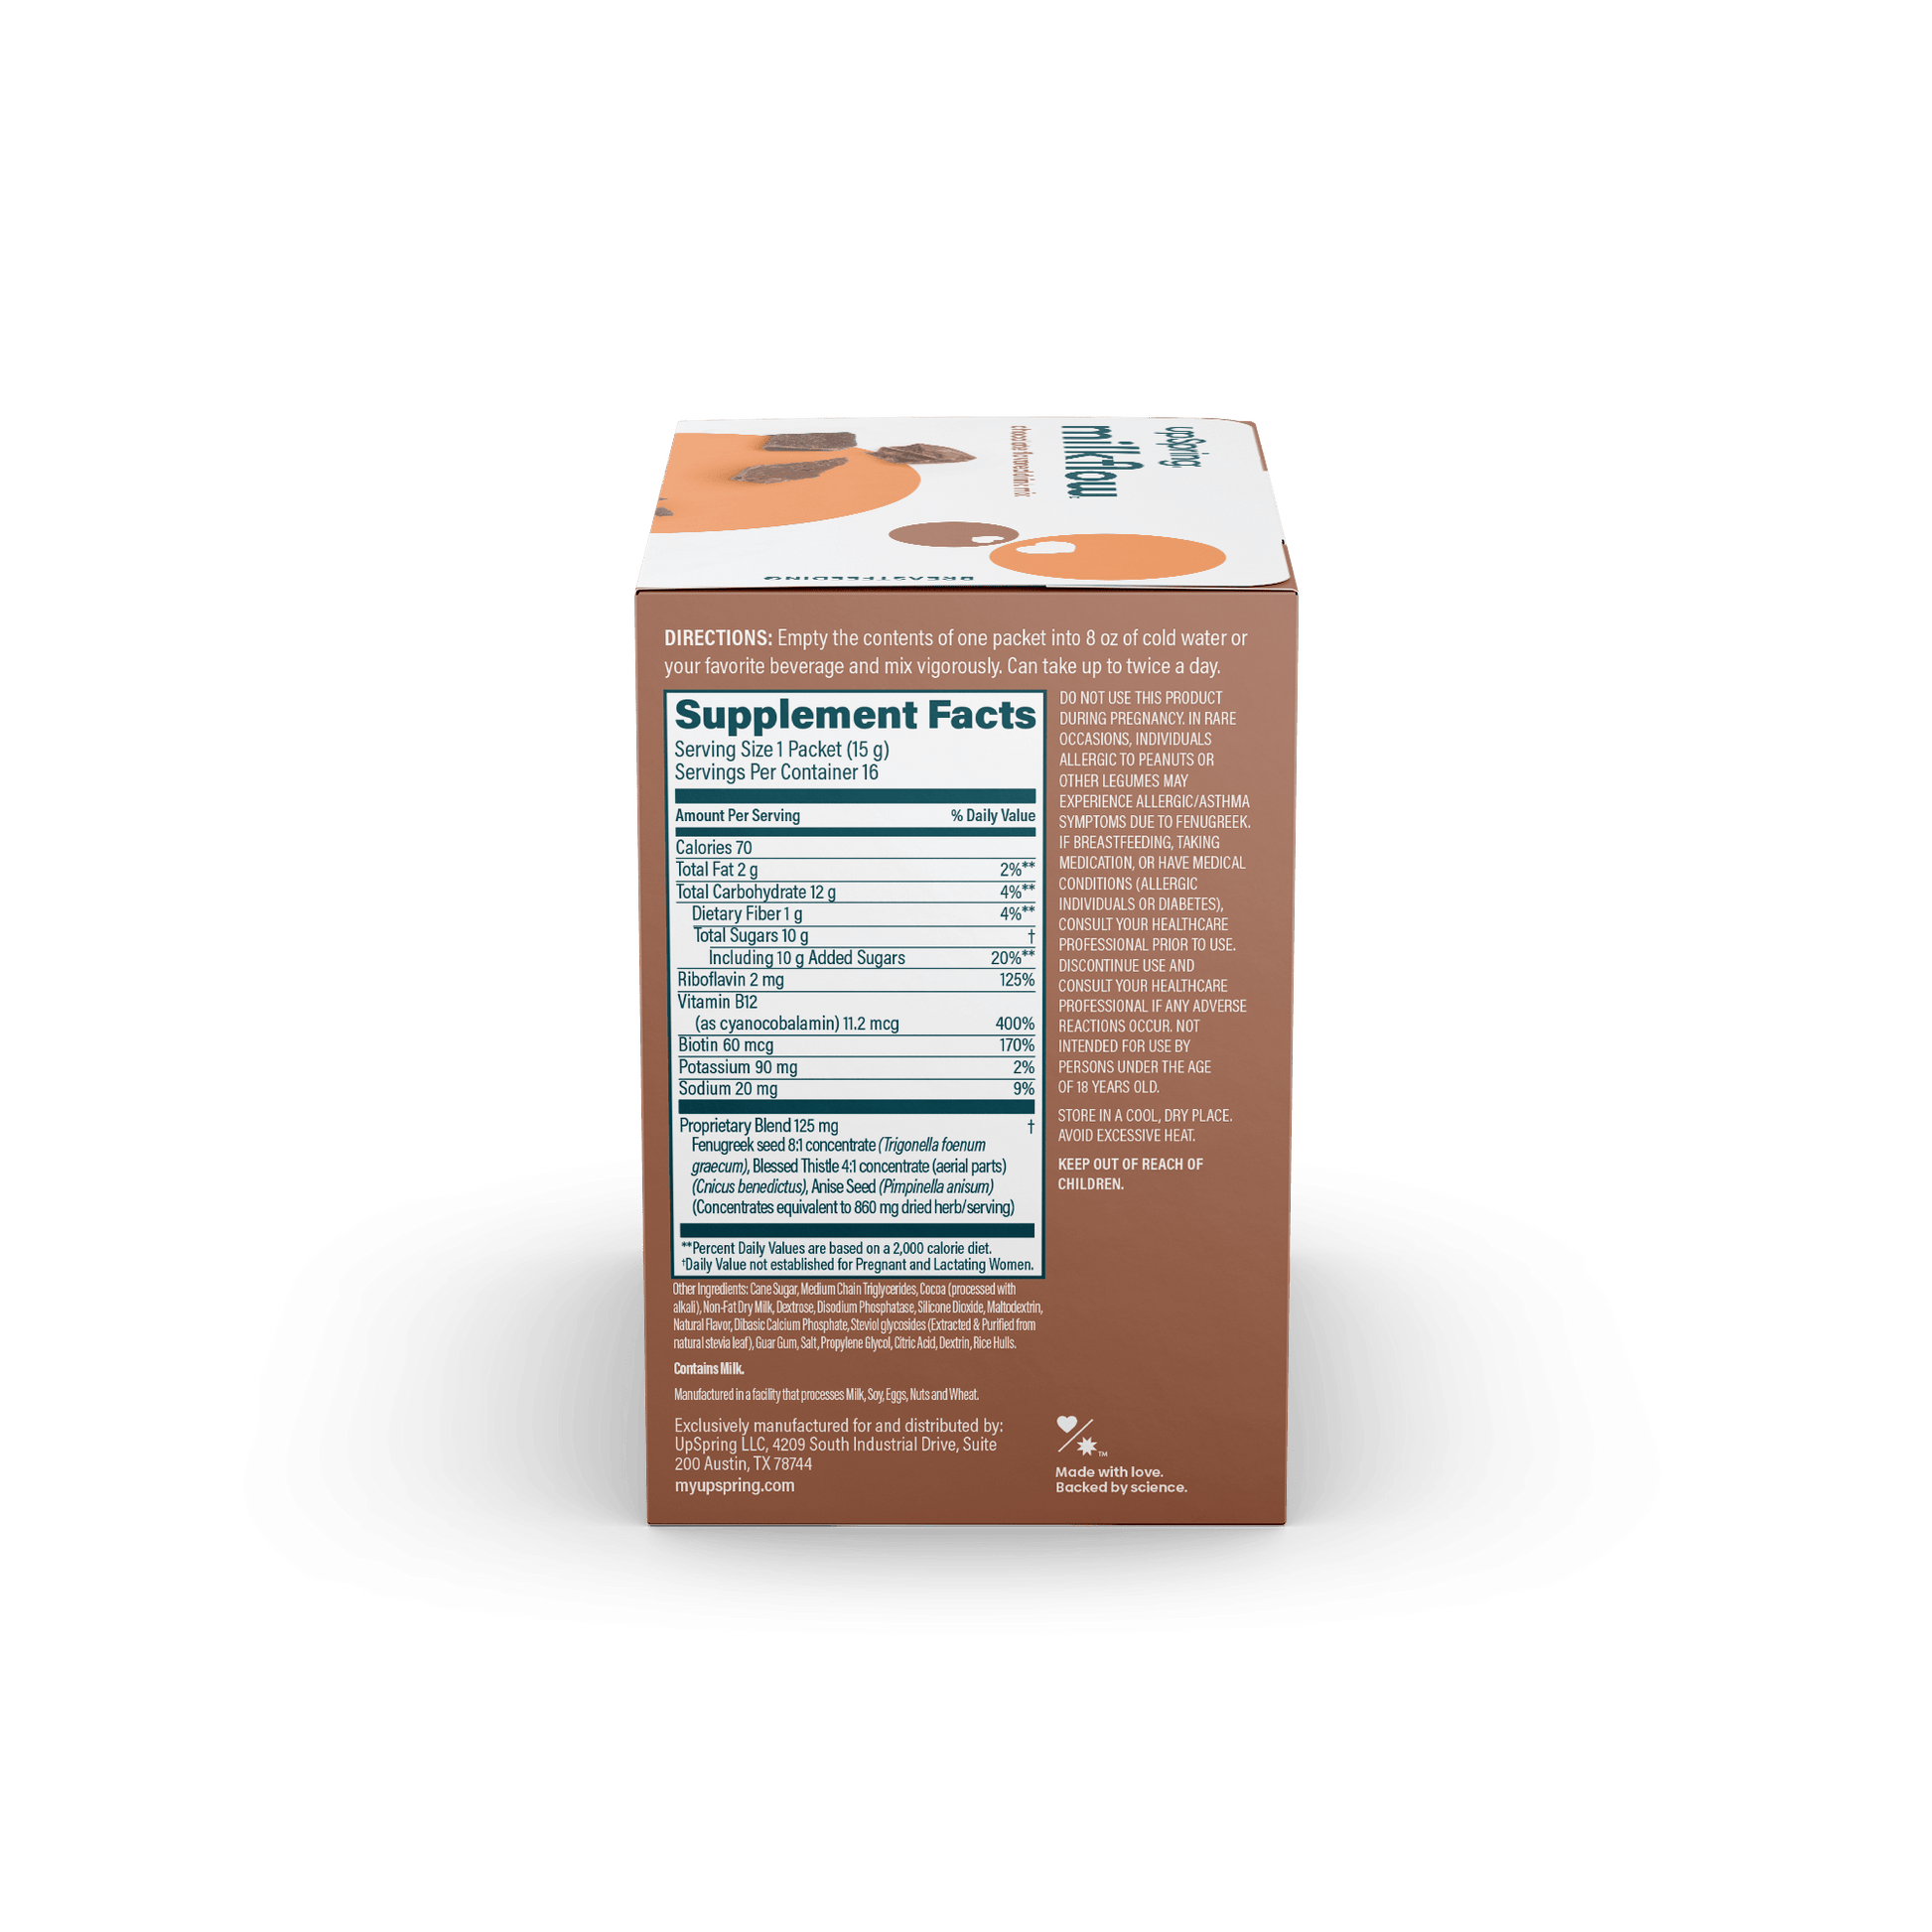 The Supplement Facts and warnings panel on the side of the MilkFlow box